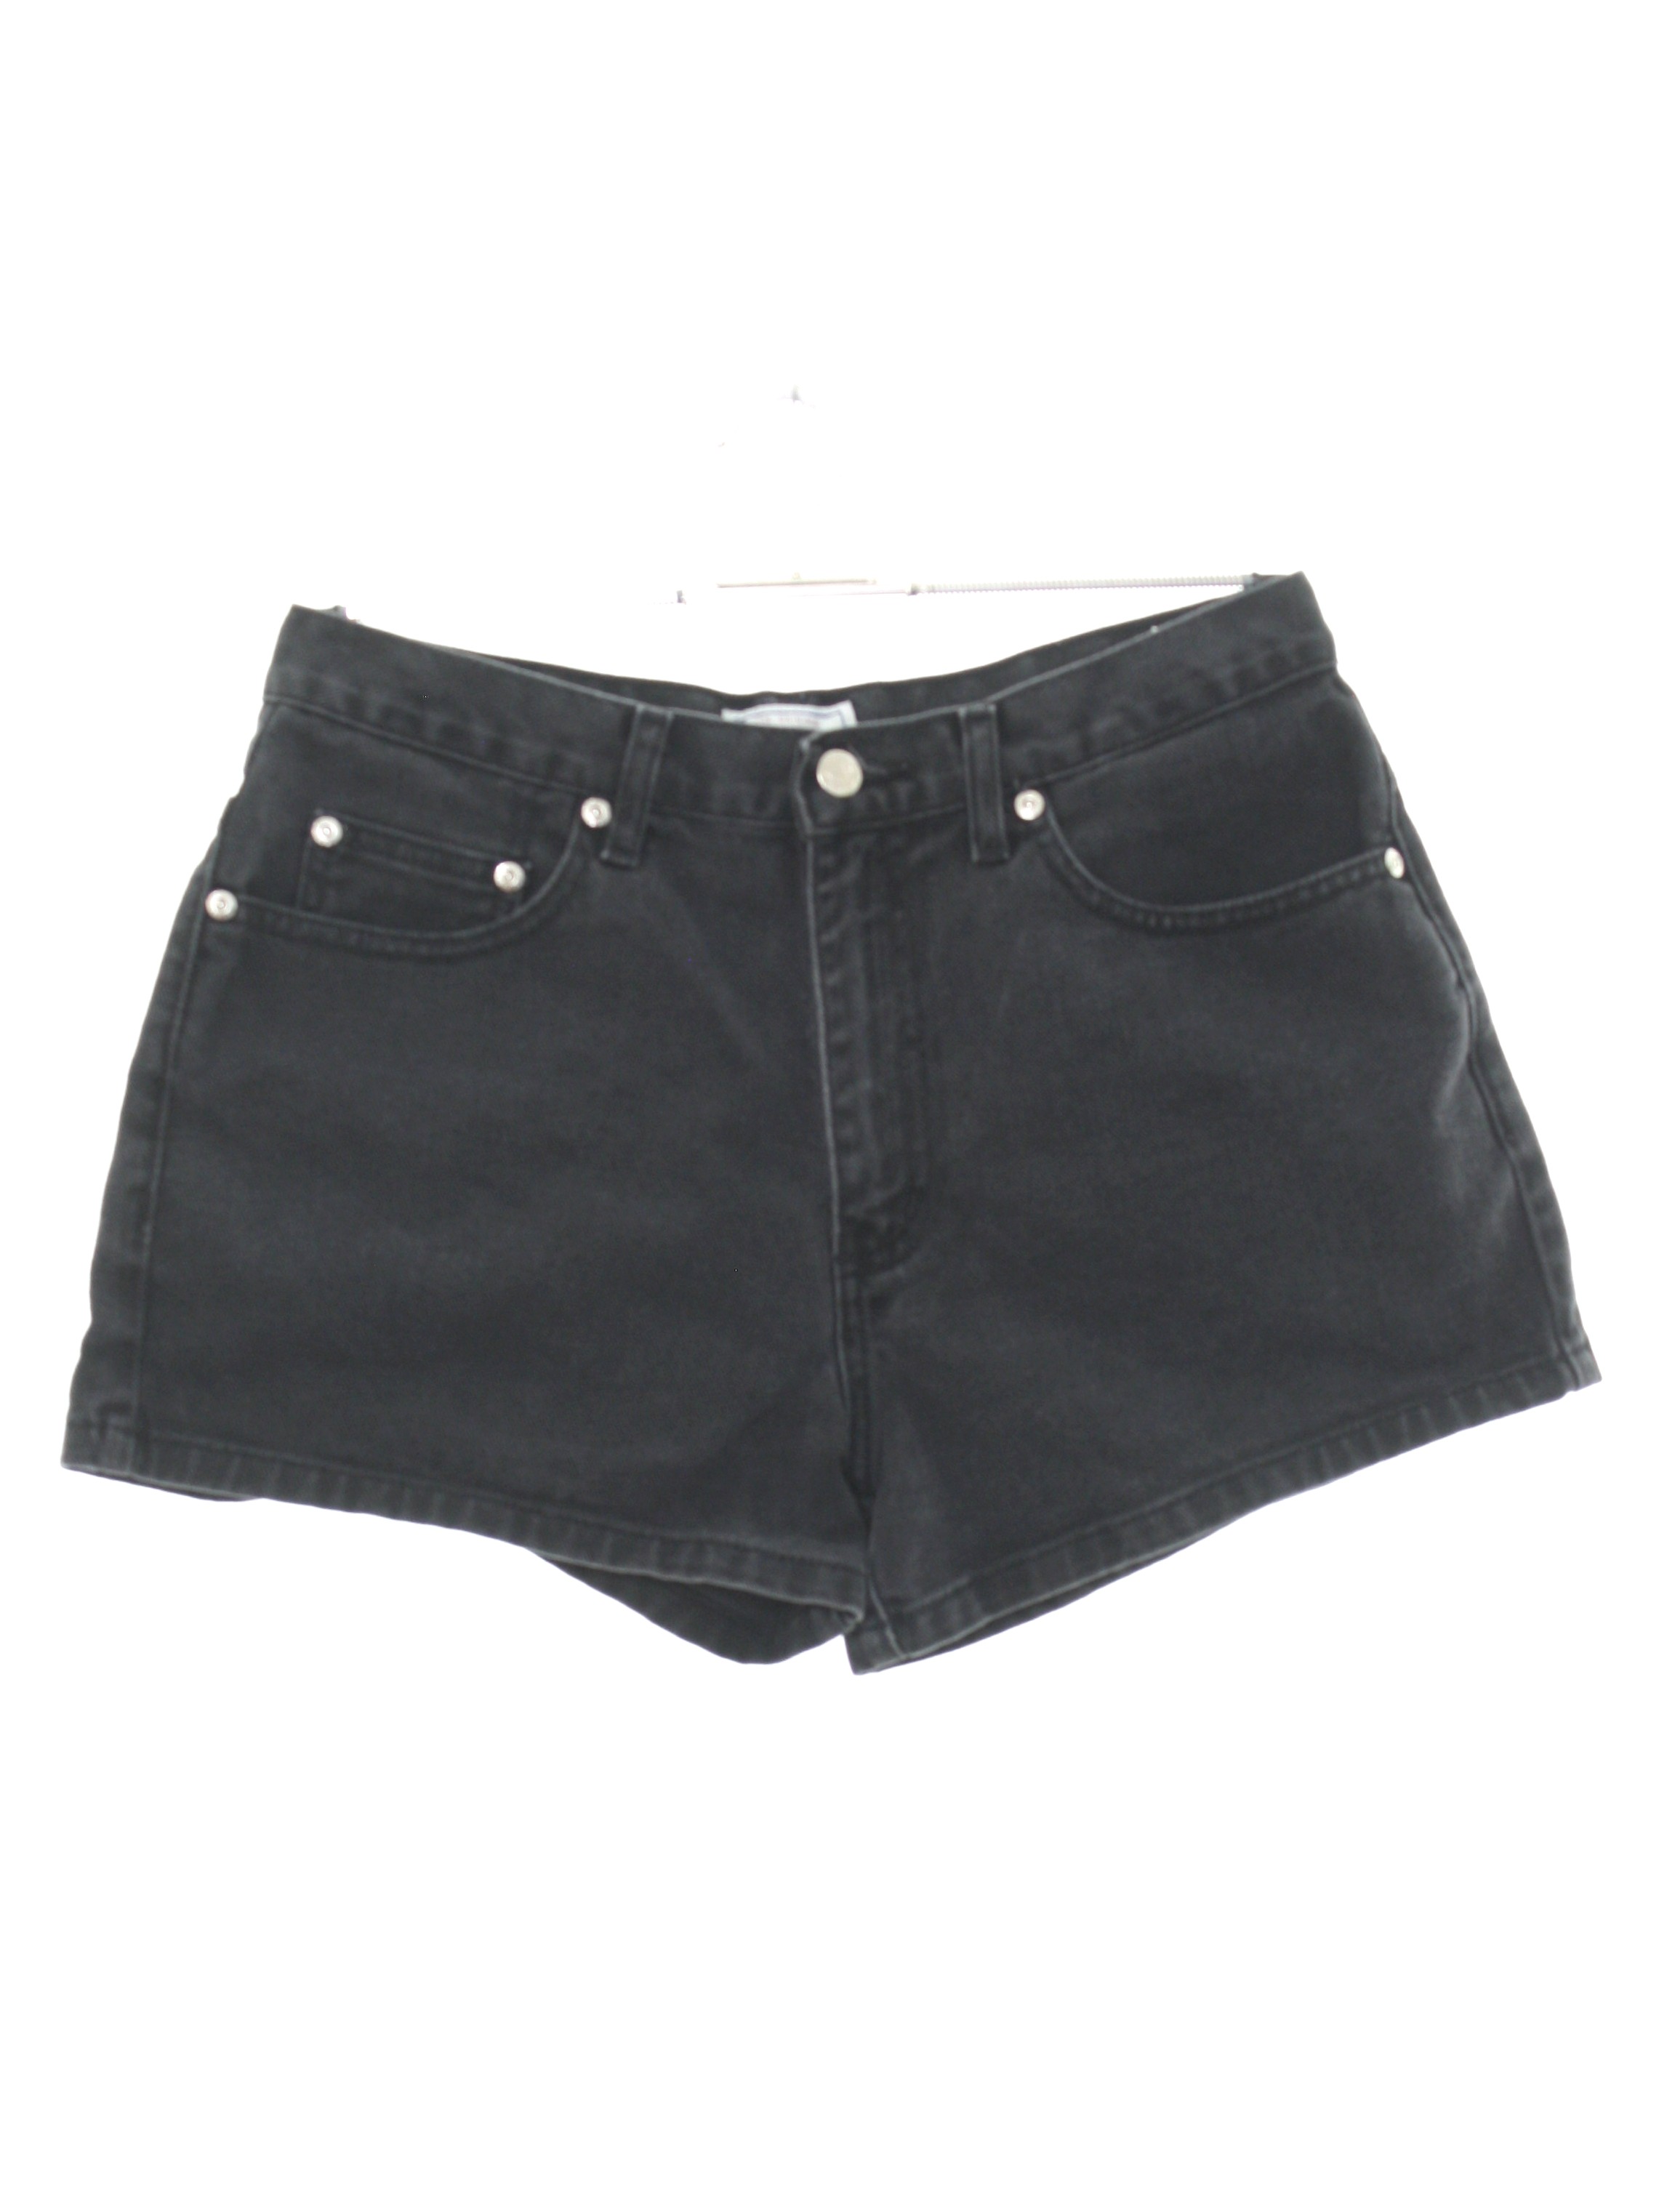 1990\'s Shorts (Arizona Jean Company): 90s -Arizona Jean Company- Womens  faded black background cotton high rise denim jorts. Classic 5 pocket style  and zip fly. Assembled in Mexico. Actual size tag reads